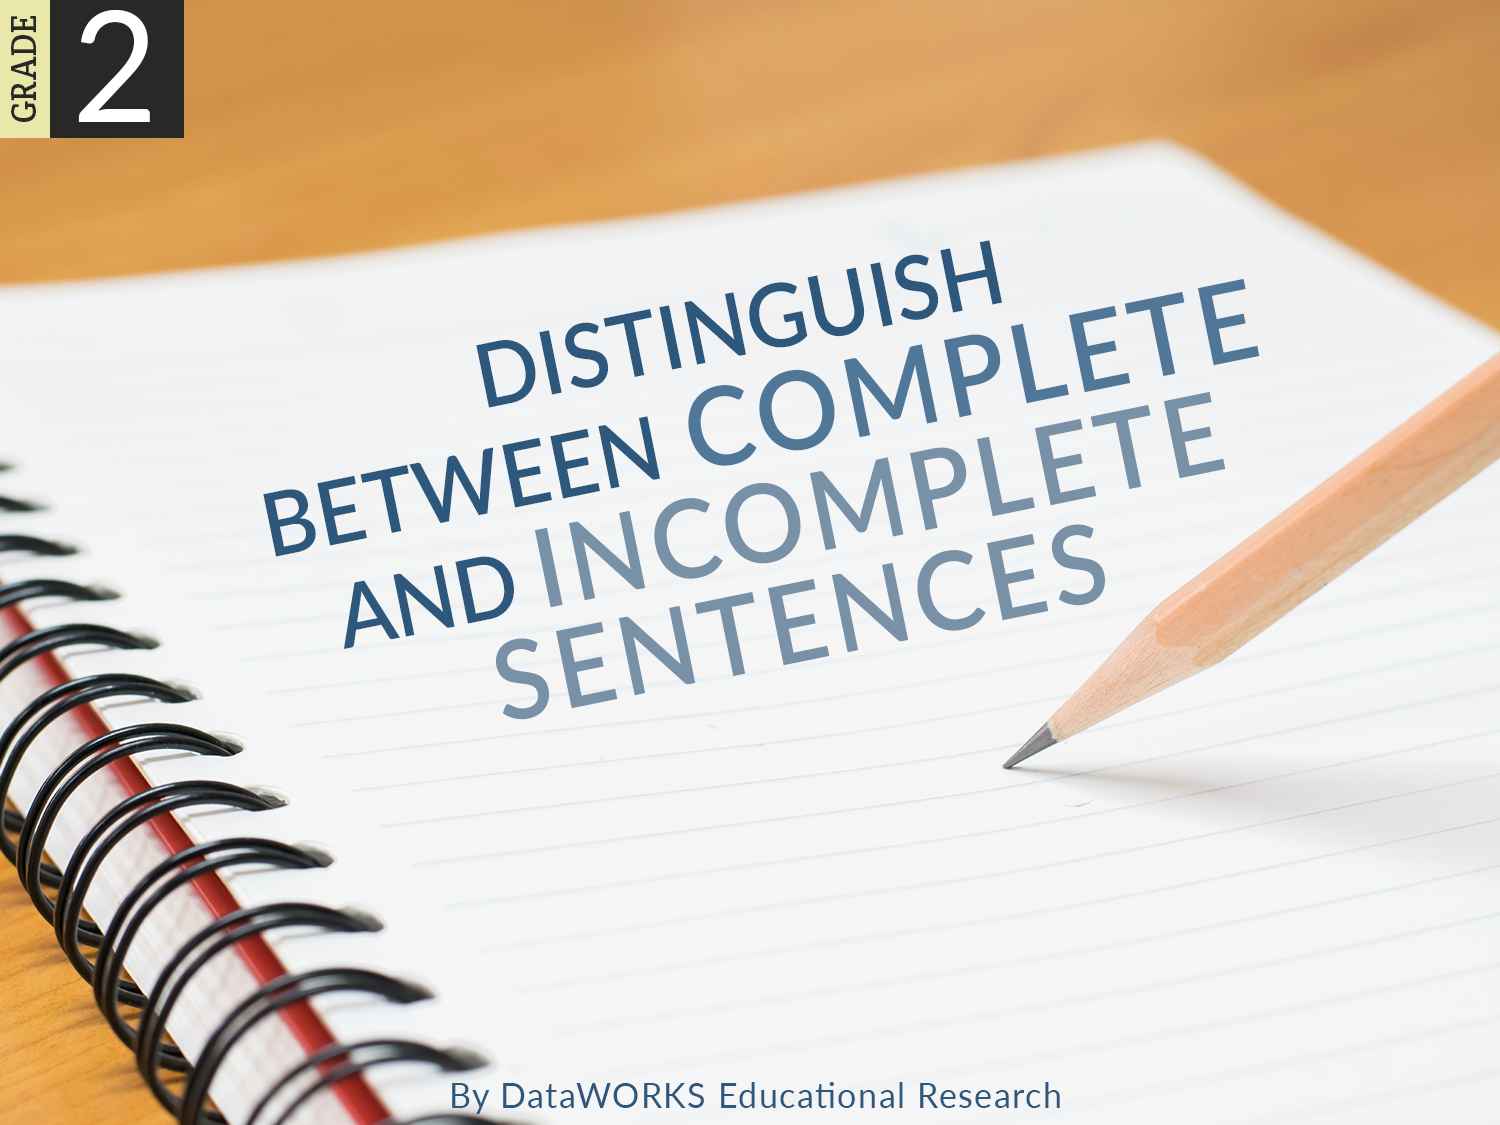 distinguish-between-complete-and-incomplete-sentences-lesson-plans